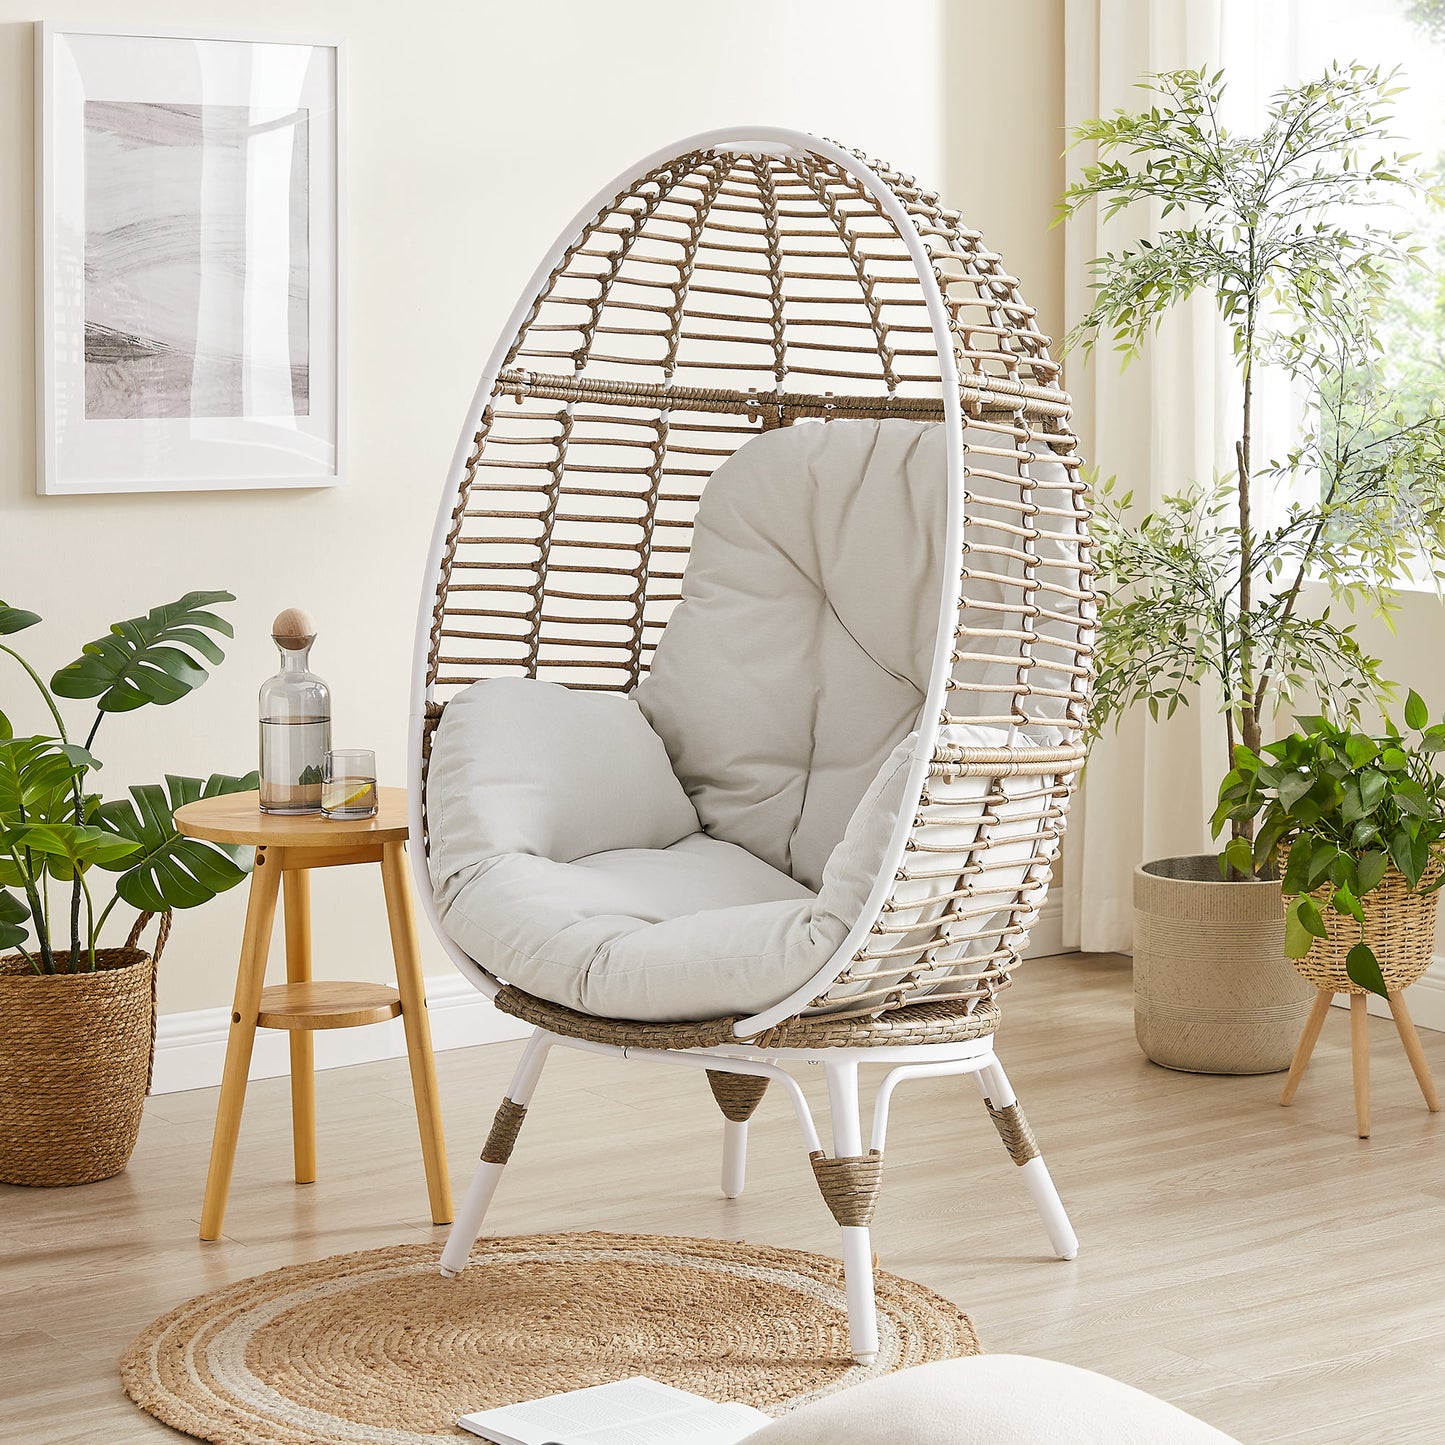 Outdoor Patio Wicker Egg Chair Indoor All-Weather Rattan Lounger Chair with Cushion for Patio, Backyard, Living Room, White